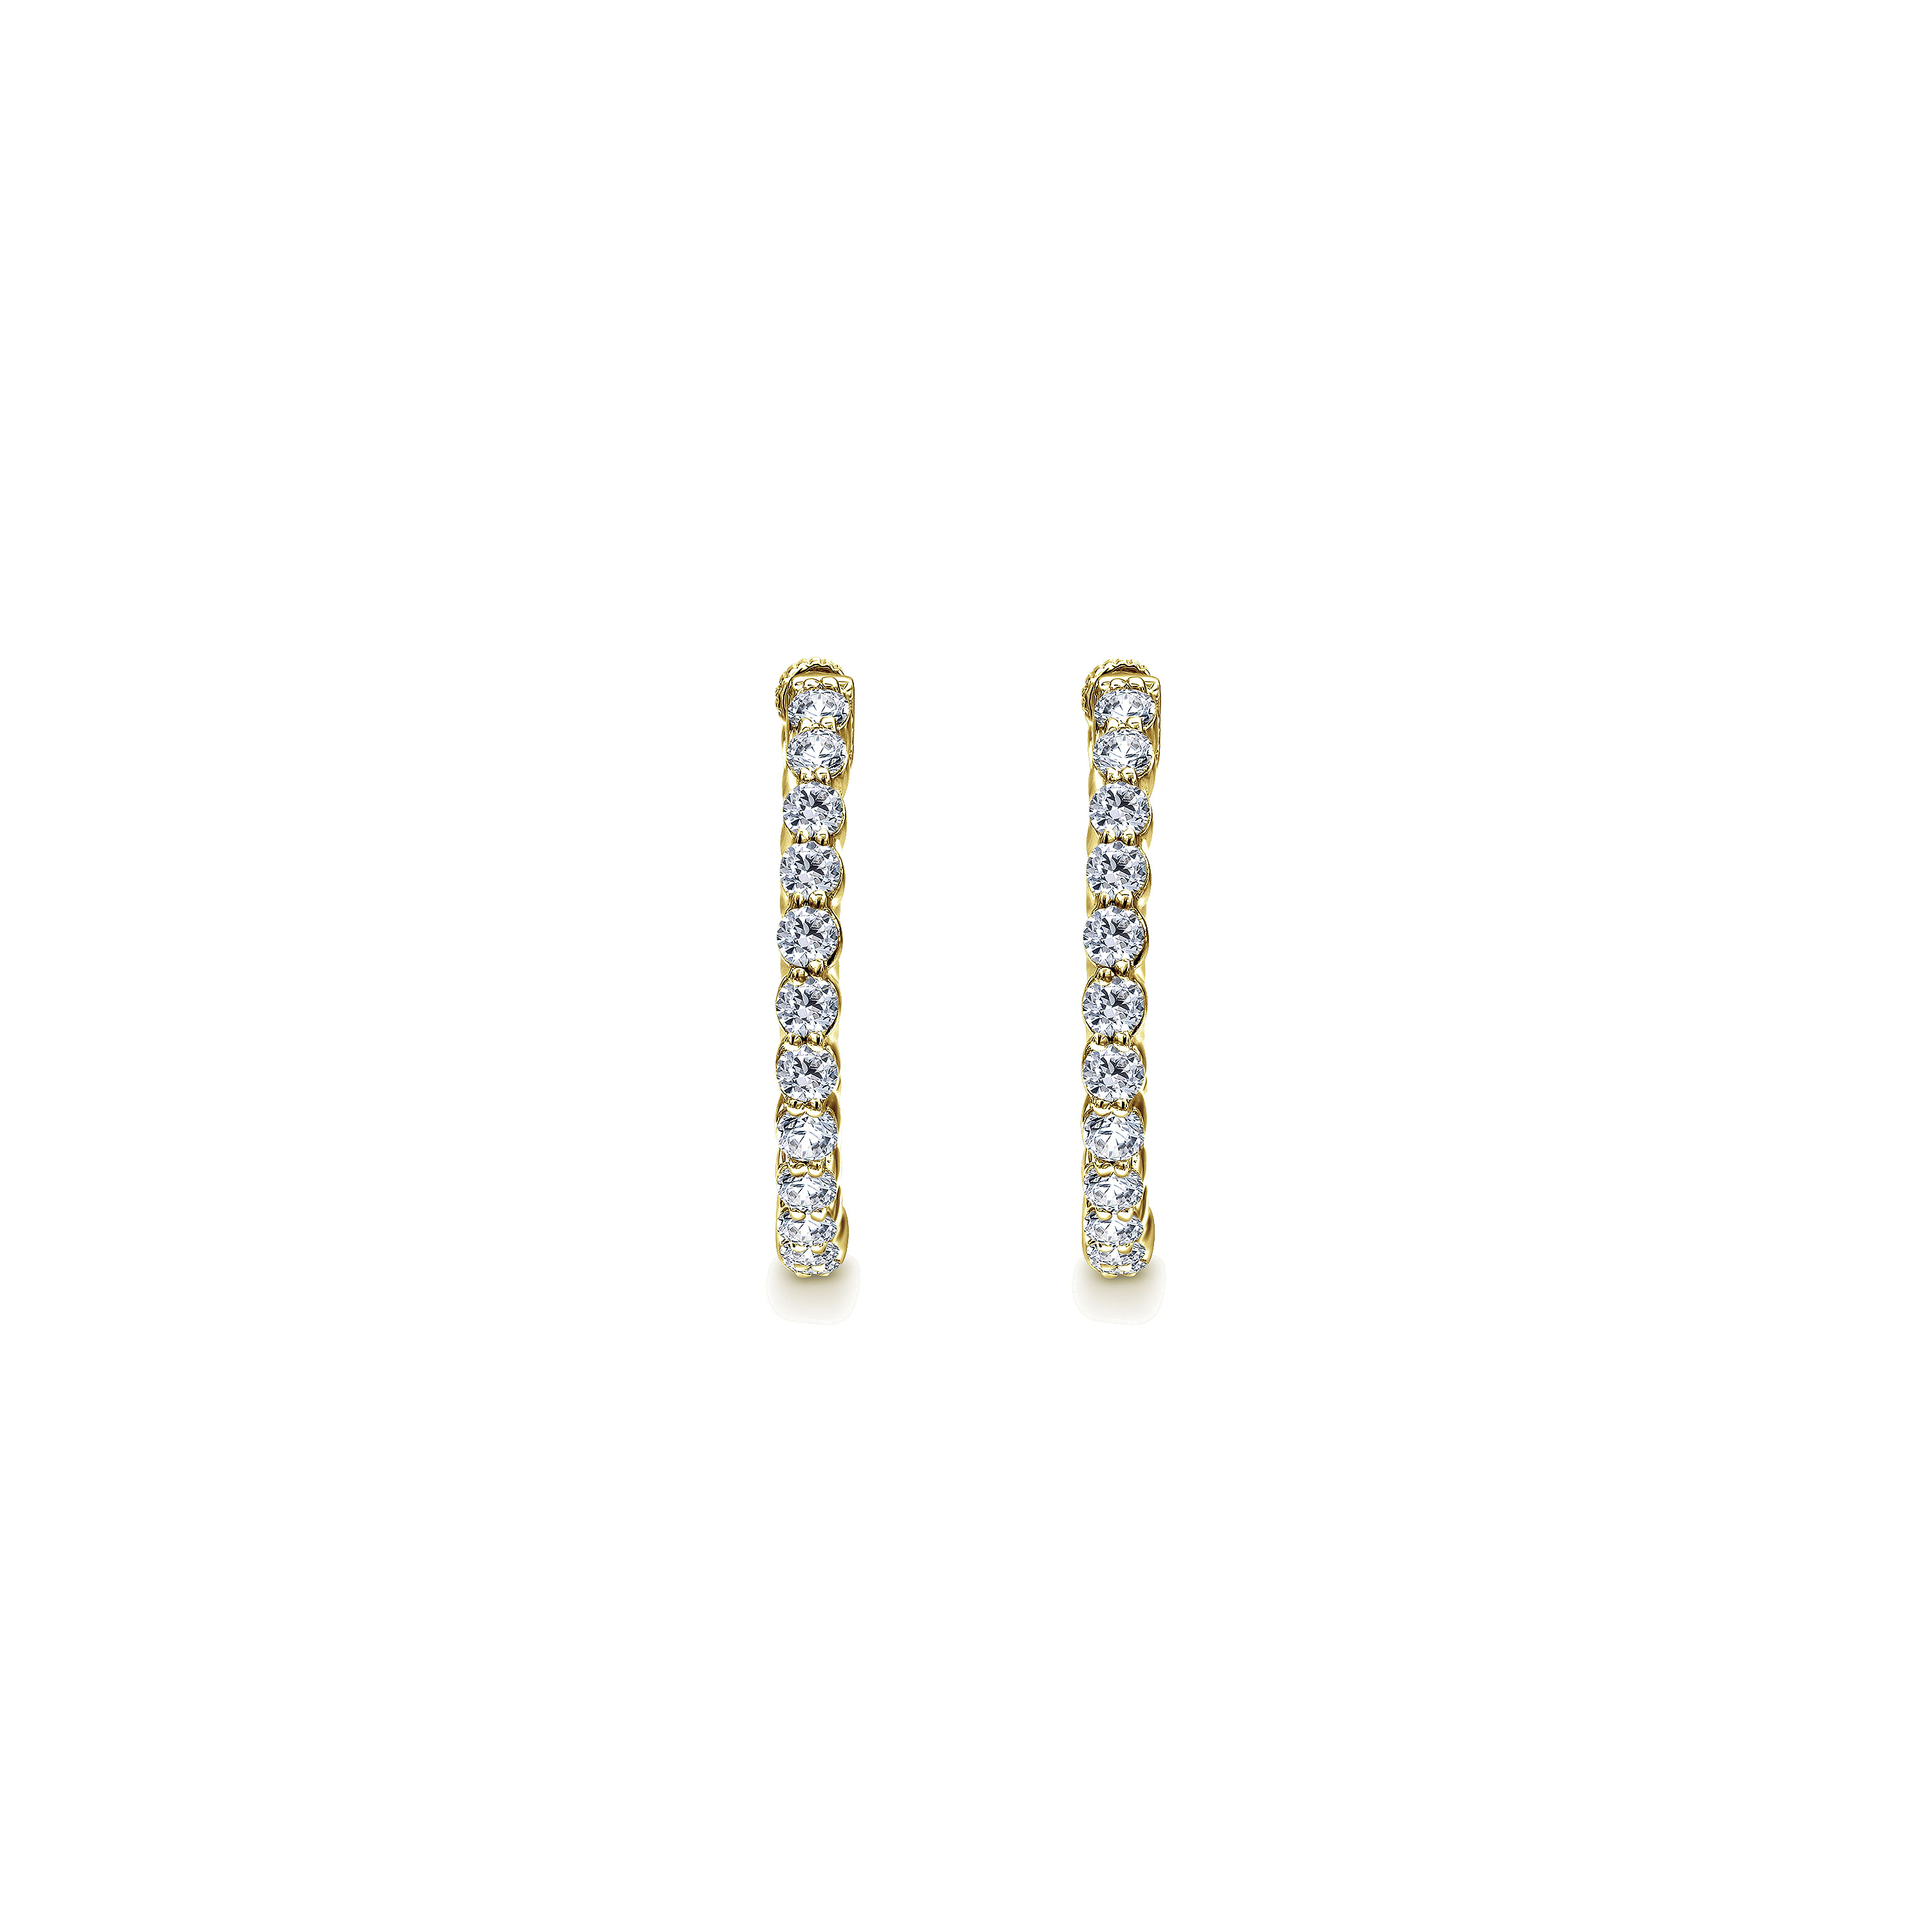 14K Yellow Gold Prong Set 20mm Round Inside Out Diamond Hoop Earrings